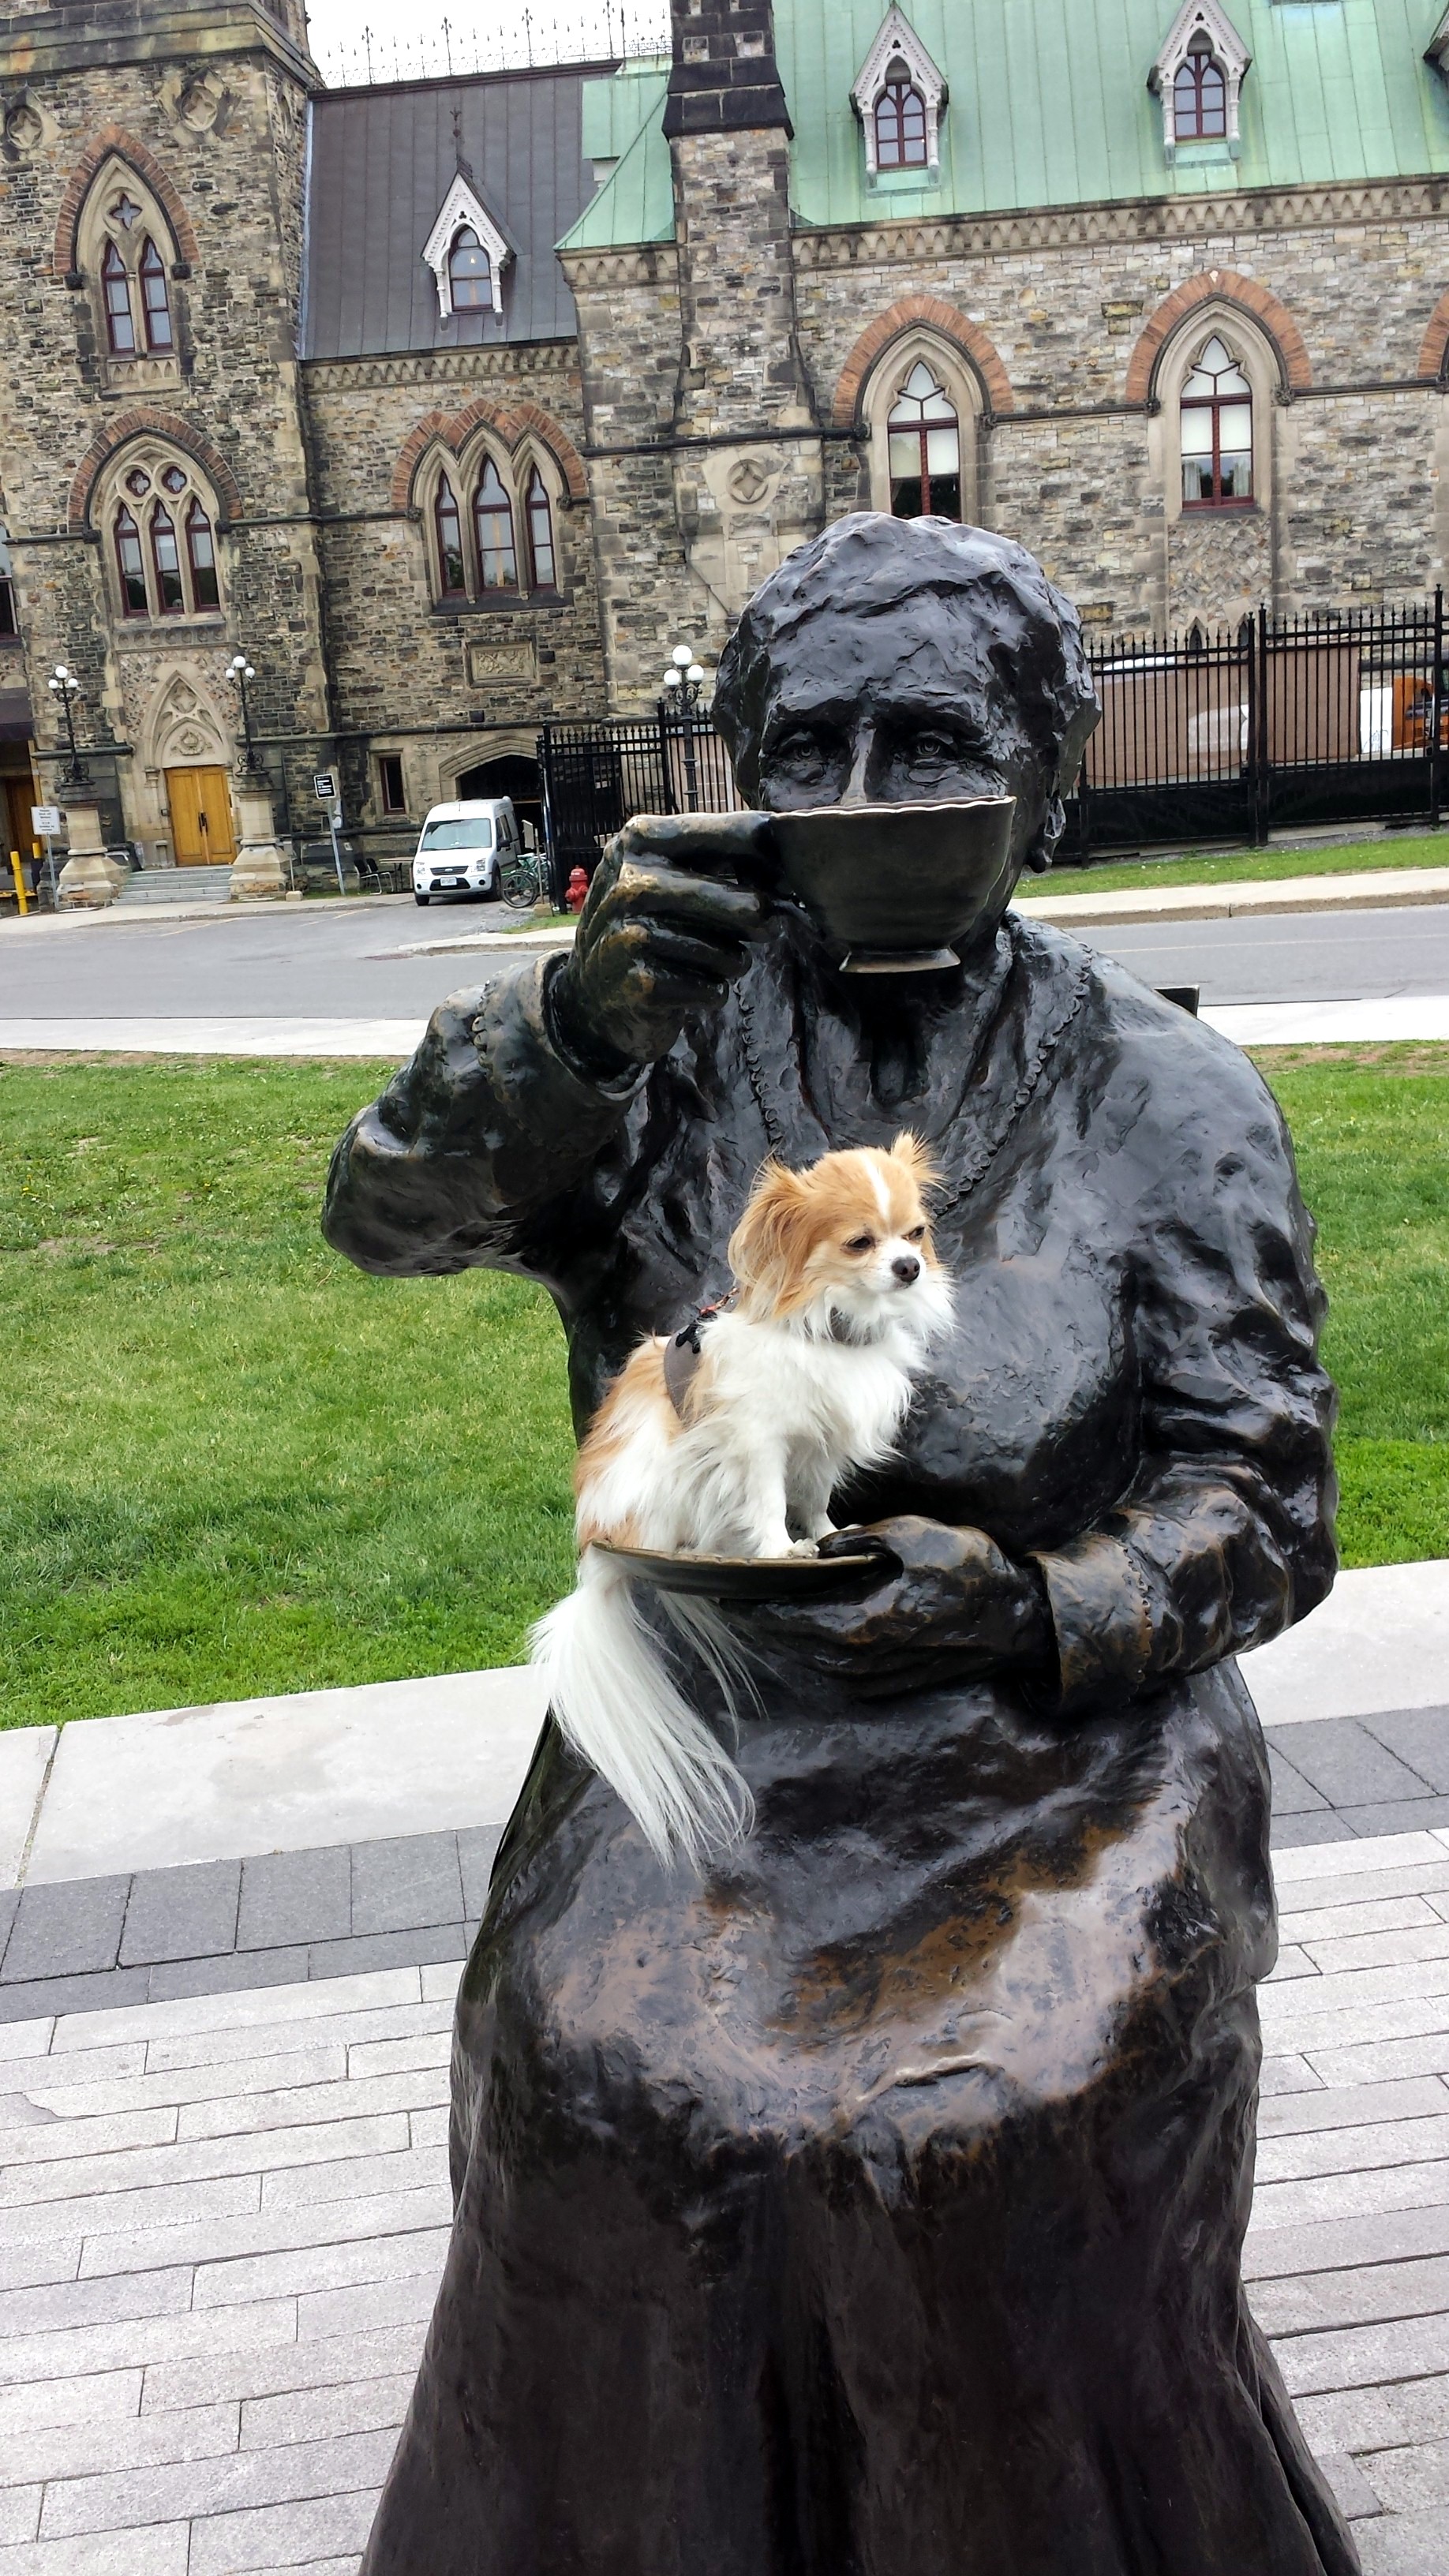 Travel blogger, Montecristo, perched on the saucer of one of the Canadian women's rights heroes portrayed in the statue grouping, The Famous Five, on Parliament Hill, in Ottawa, Canada